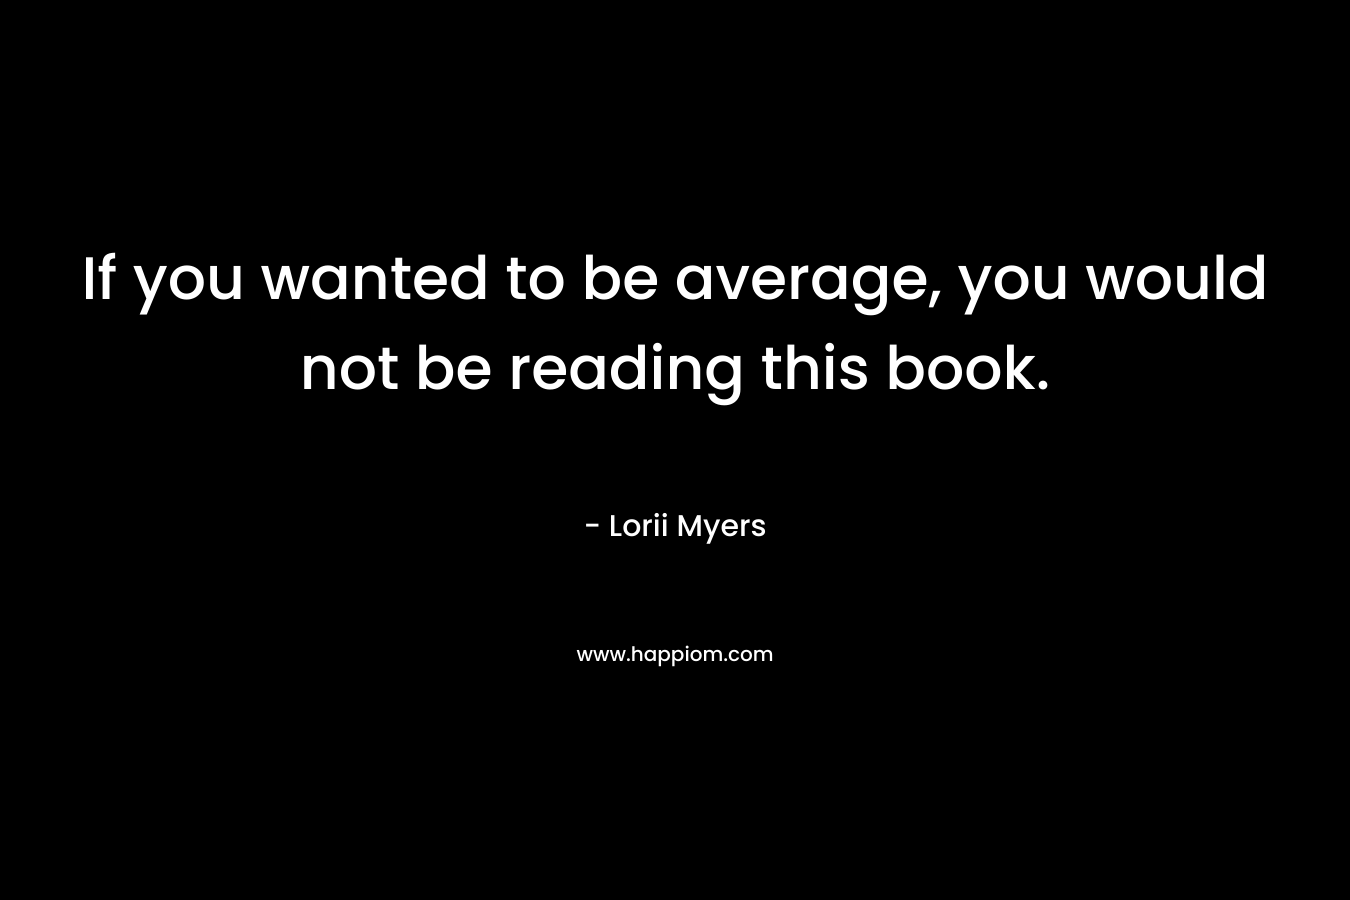 If you wanted to be average, you would not be reading this book.